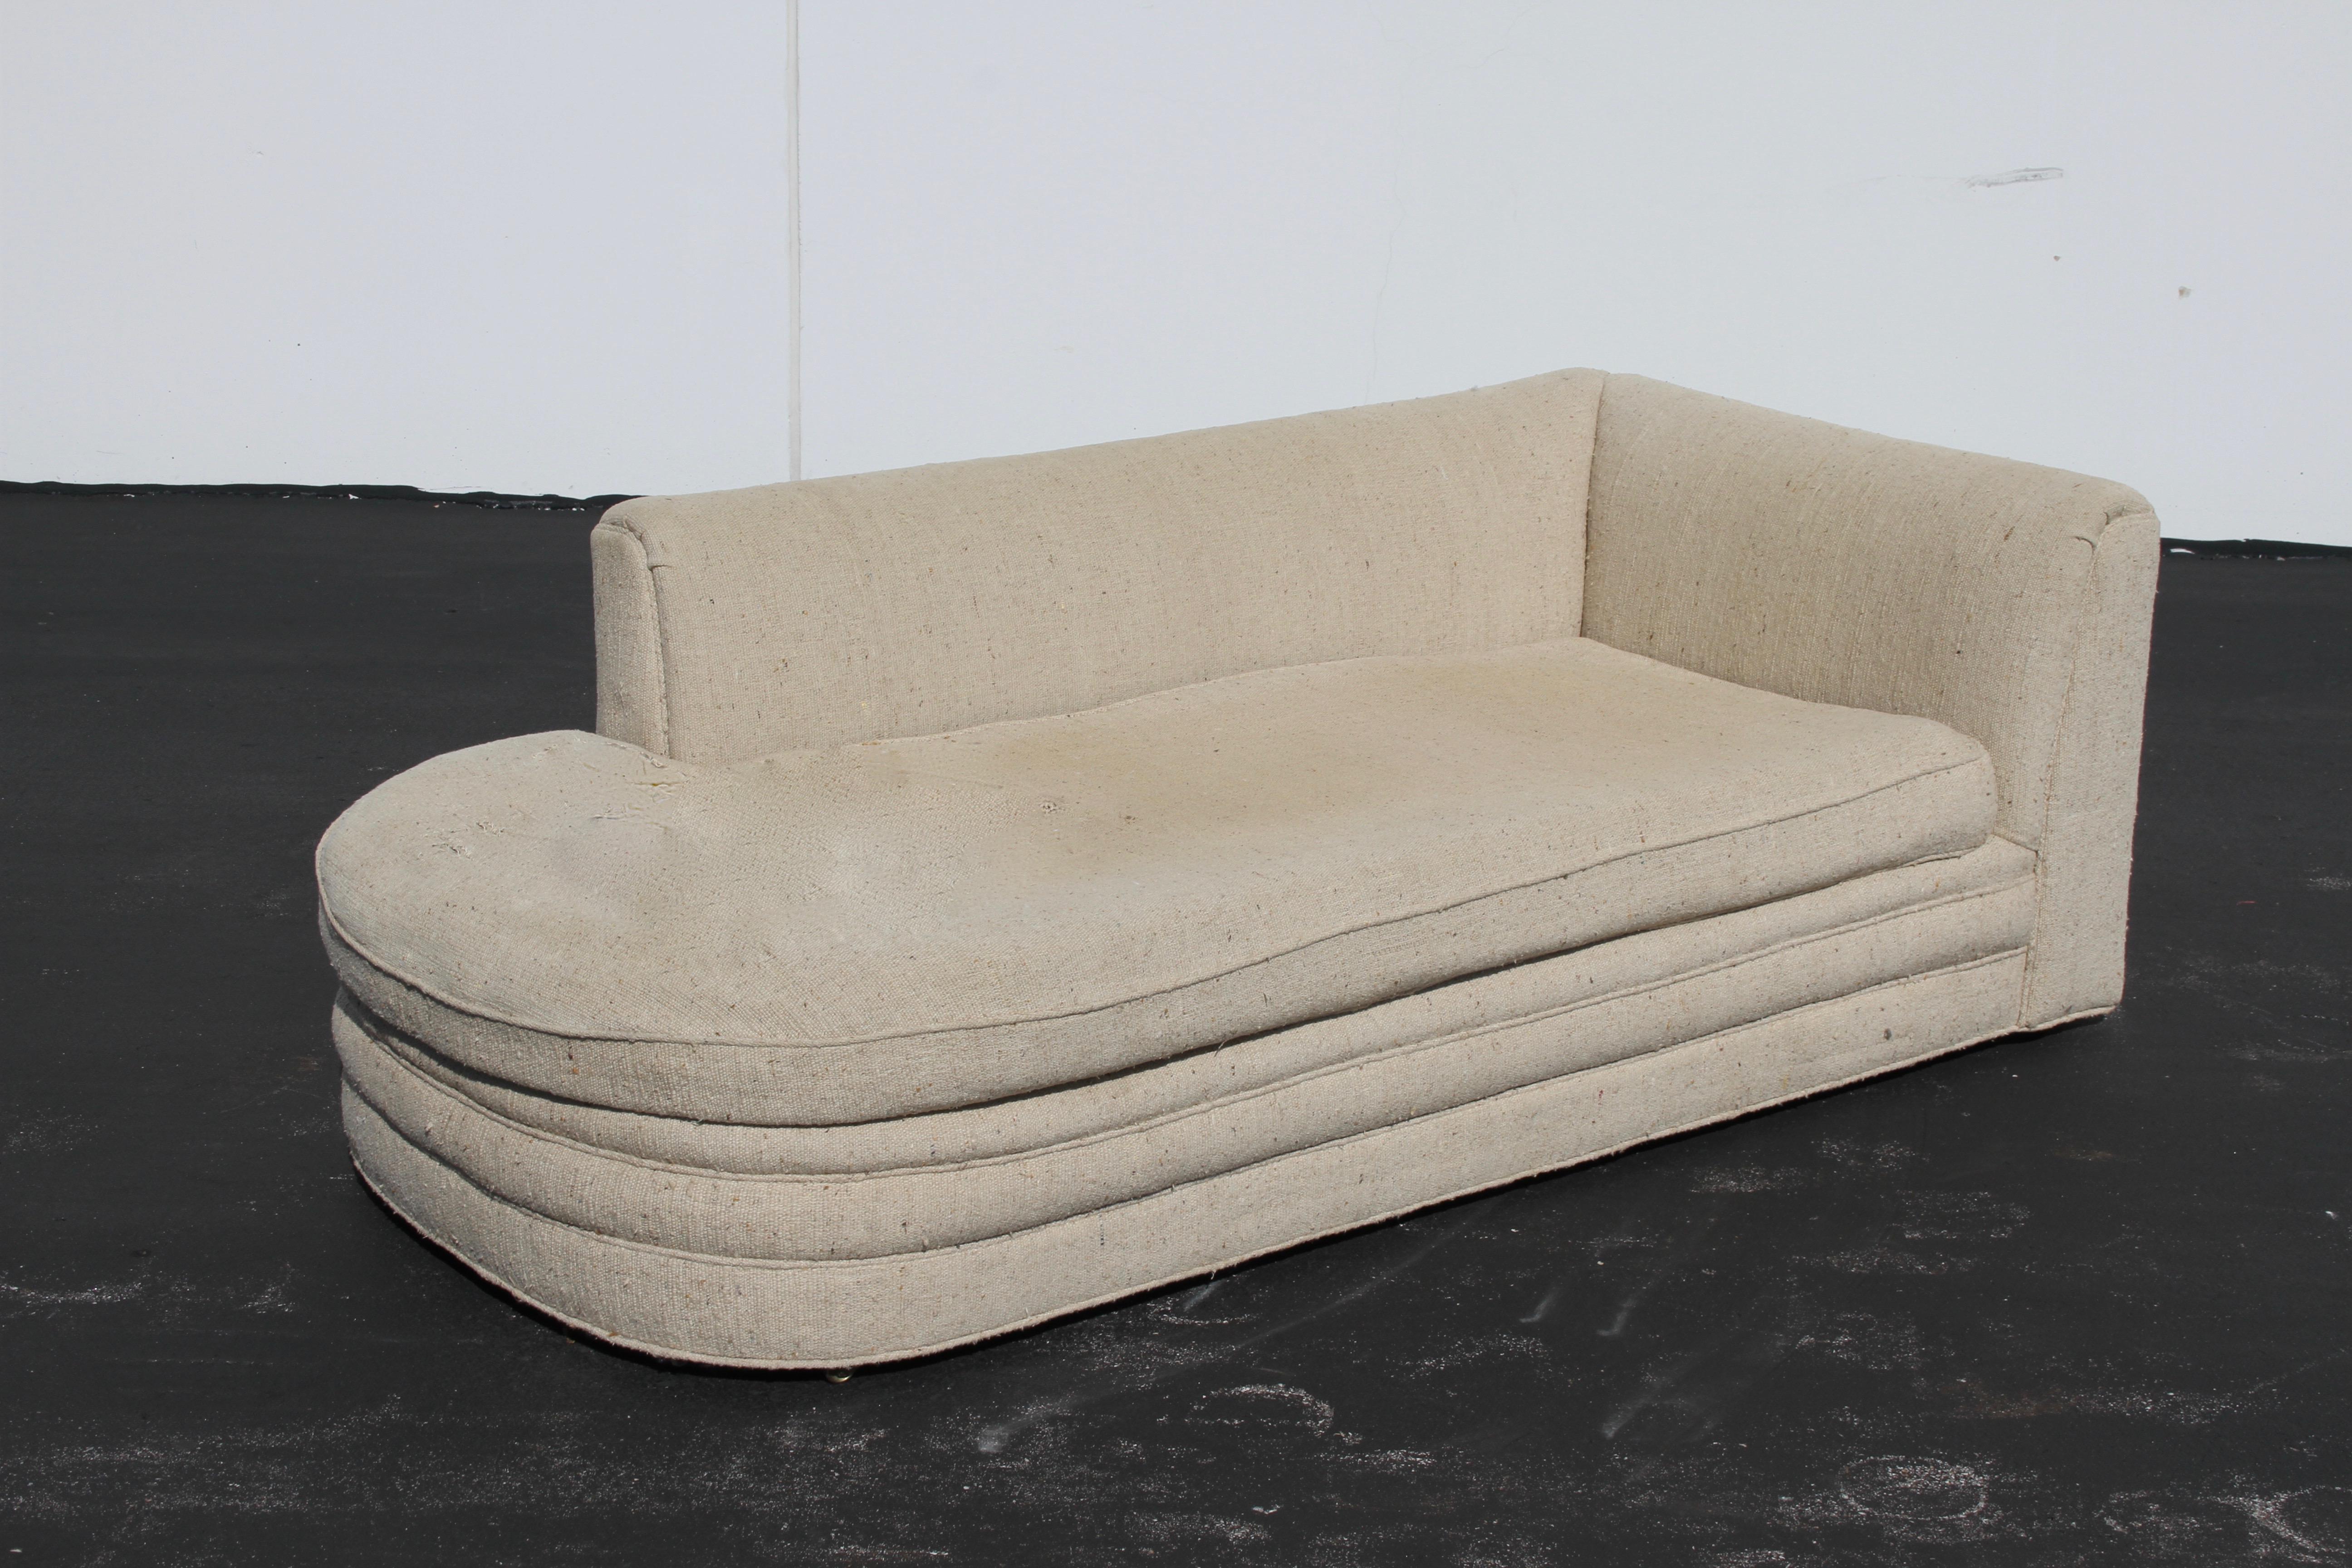 Harvey Probber Classic midcentury, open end sofa or chaise with ottoman on small brass castors. This sofa seems to have been re-upholstered in the late 1980s or early 1990s, but is in need of re-upholstery again. The fabric on the seating area is